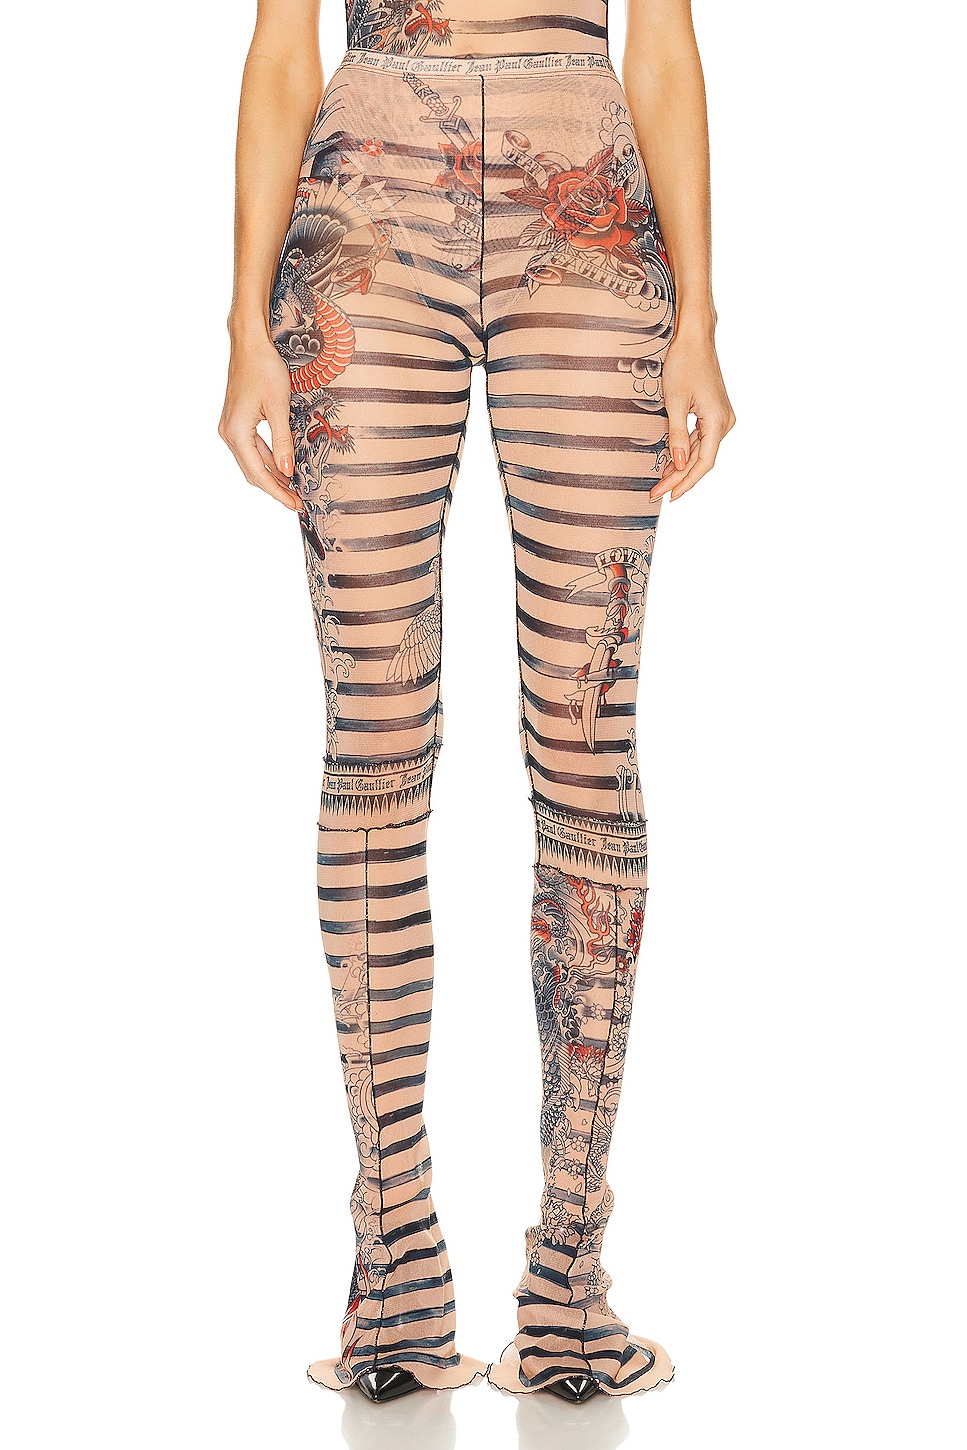 Image 1 of Jean Paul Gaultier Printed Mariniere Tattoo Flare Trouser in Nude, Blue, & Red